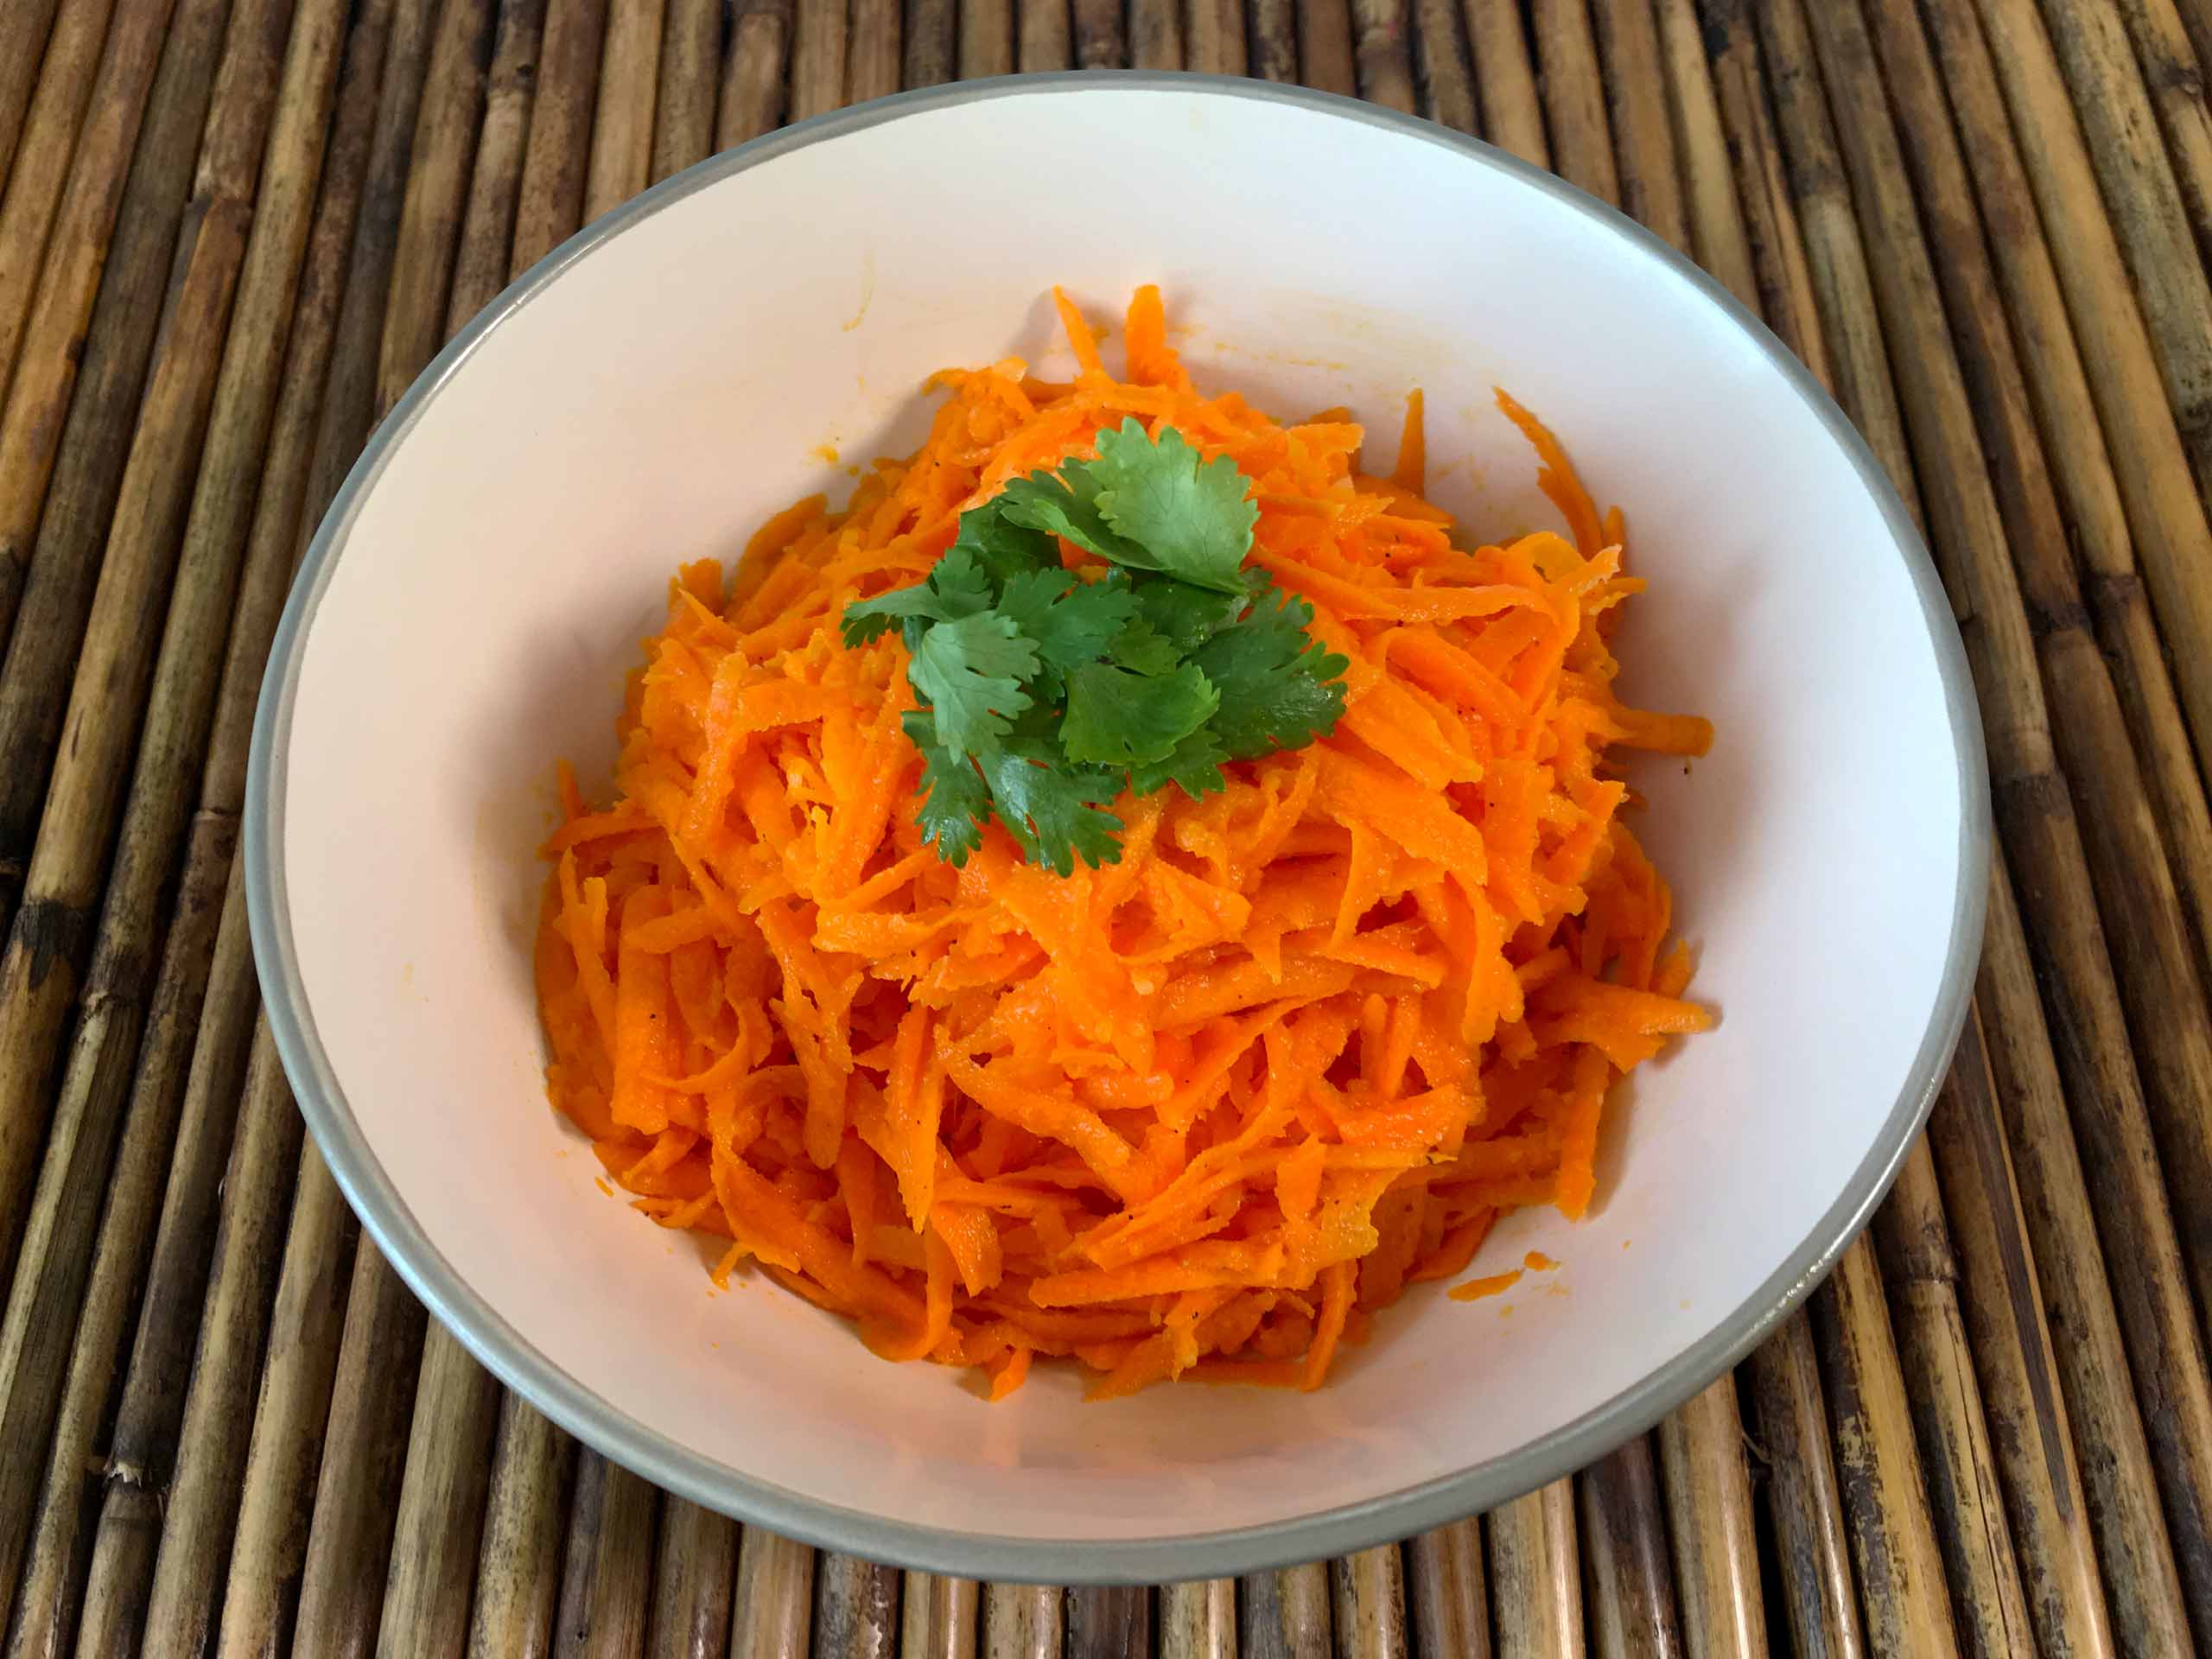 Carrot and Garlic Atomic Salad – Simple salad with awesome taste